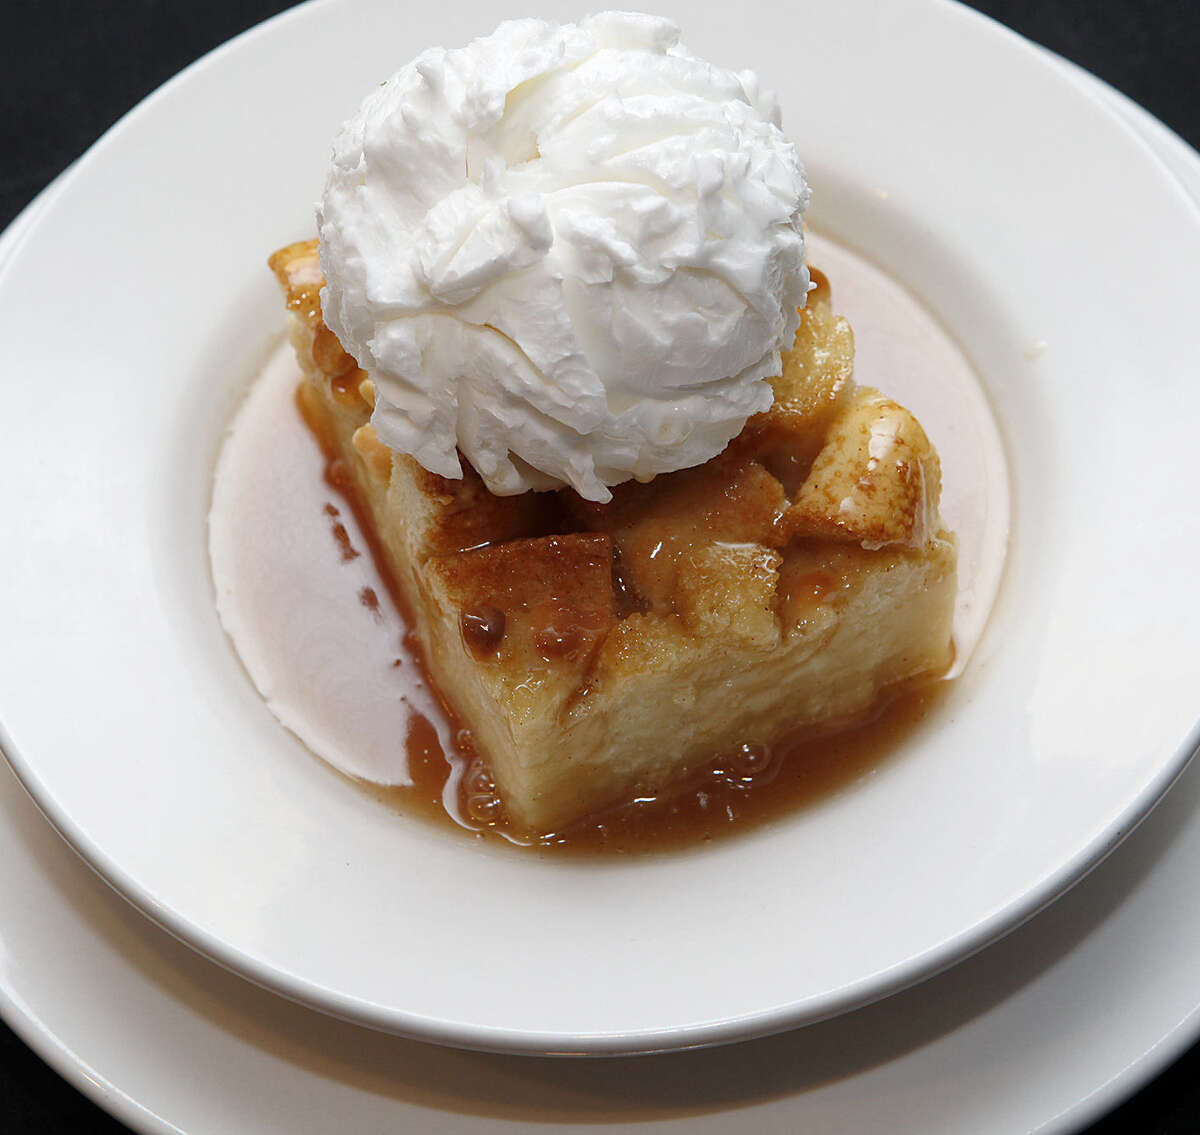 A reader raves about the sauce used on the bread pudding at River City Seafood & Grill.